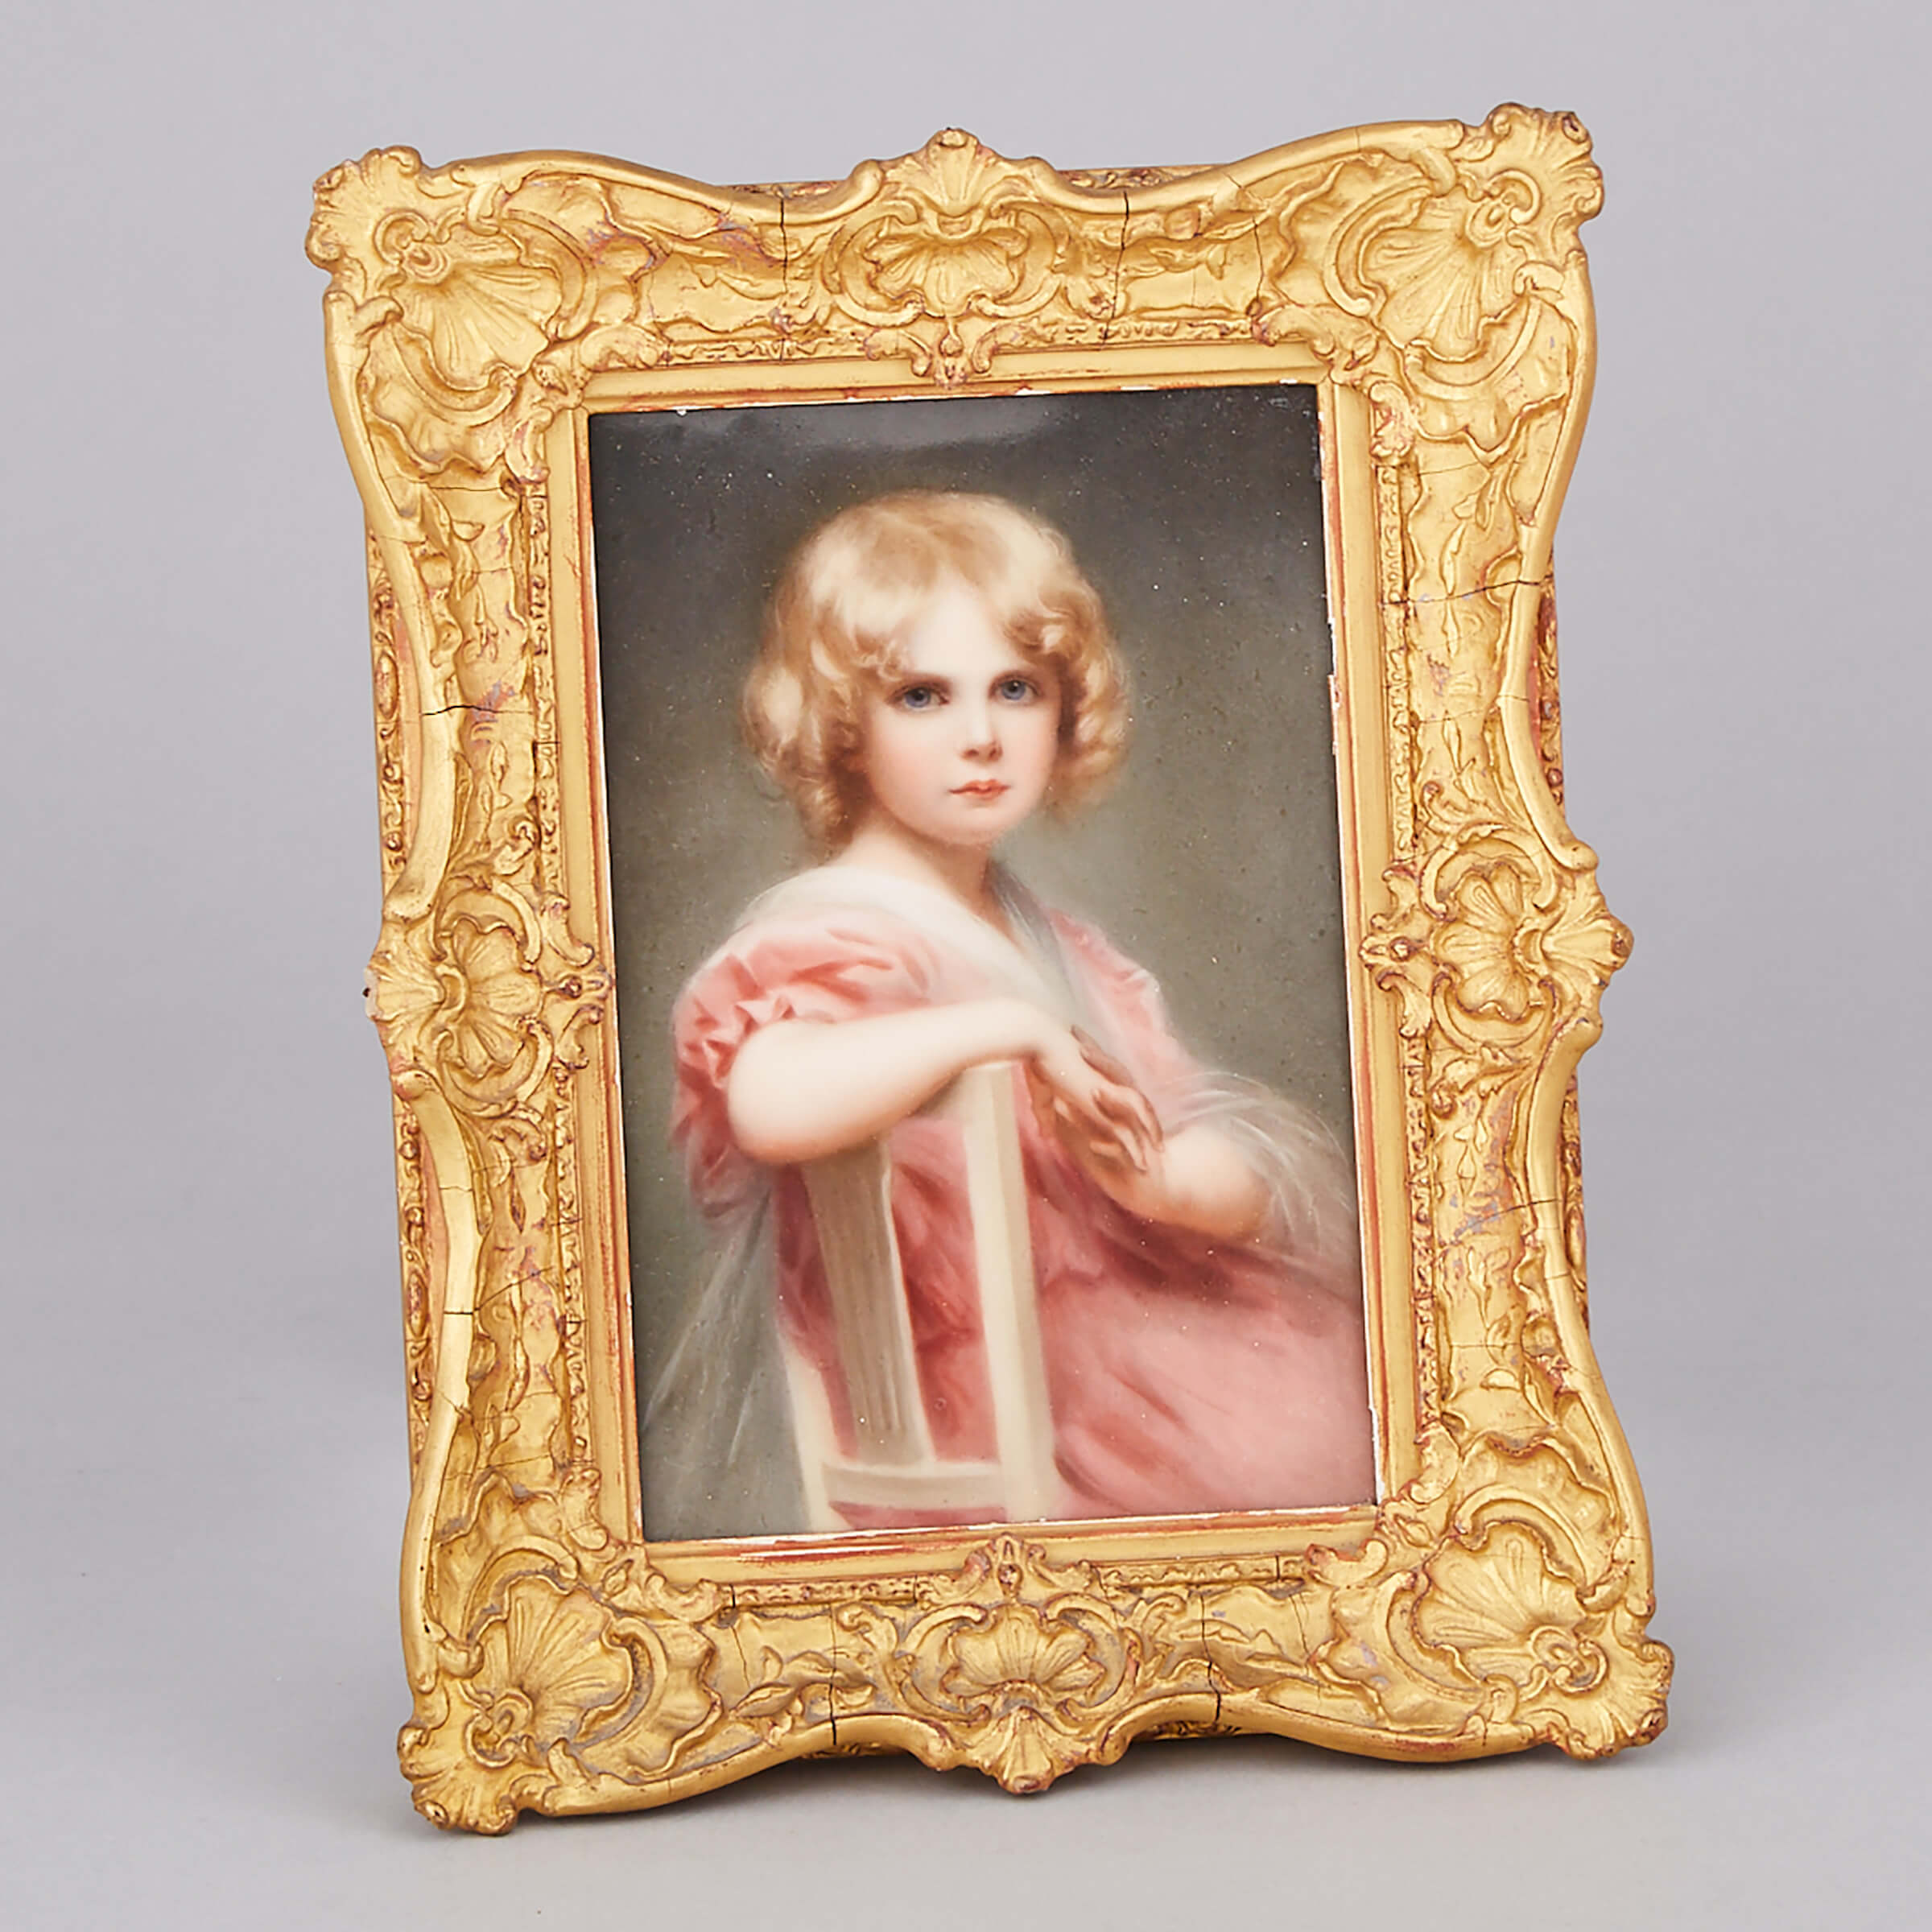 Hutschenreuther Rectangular Portrait Plaque of a Young Girl, early 20th century